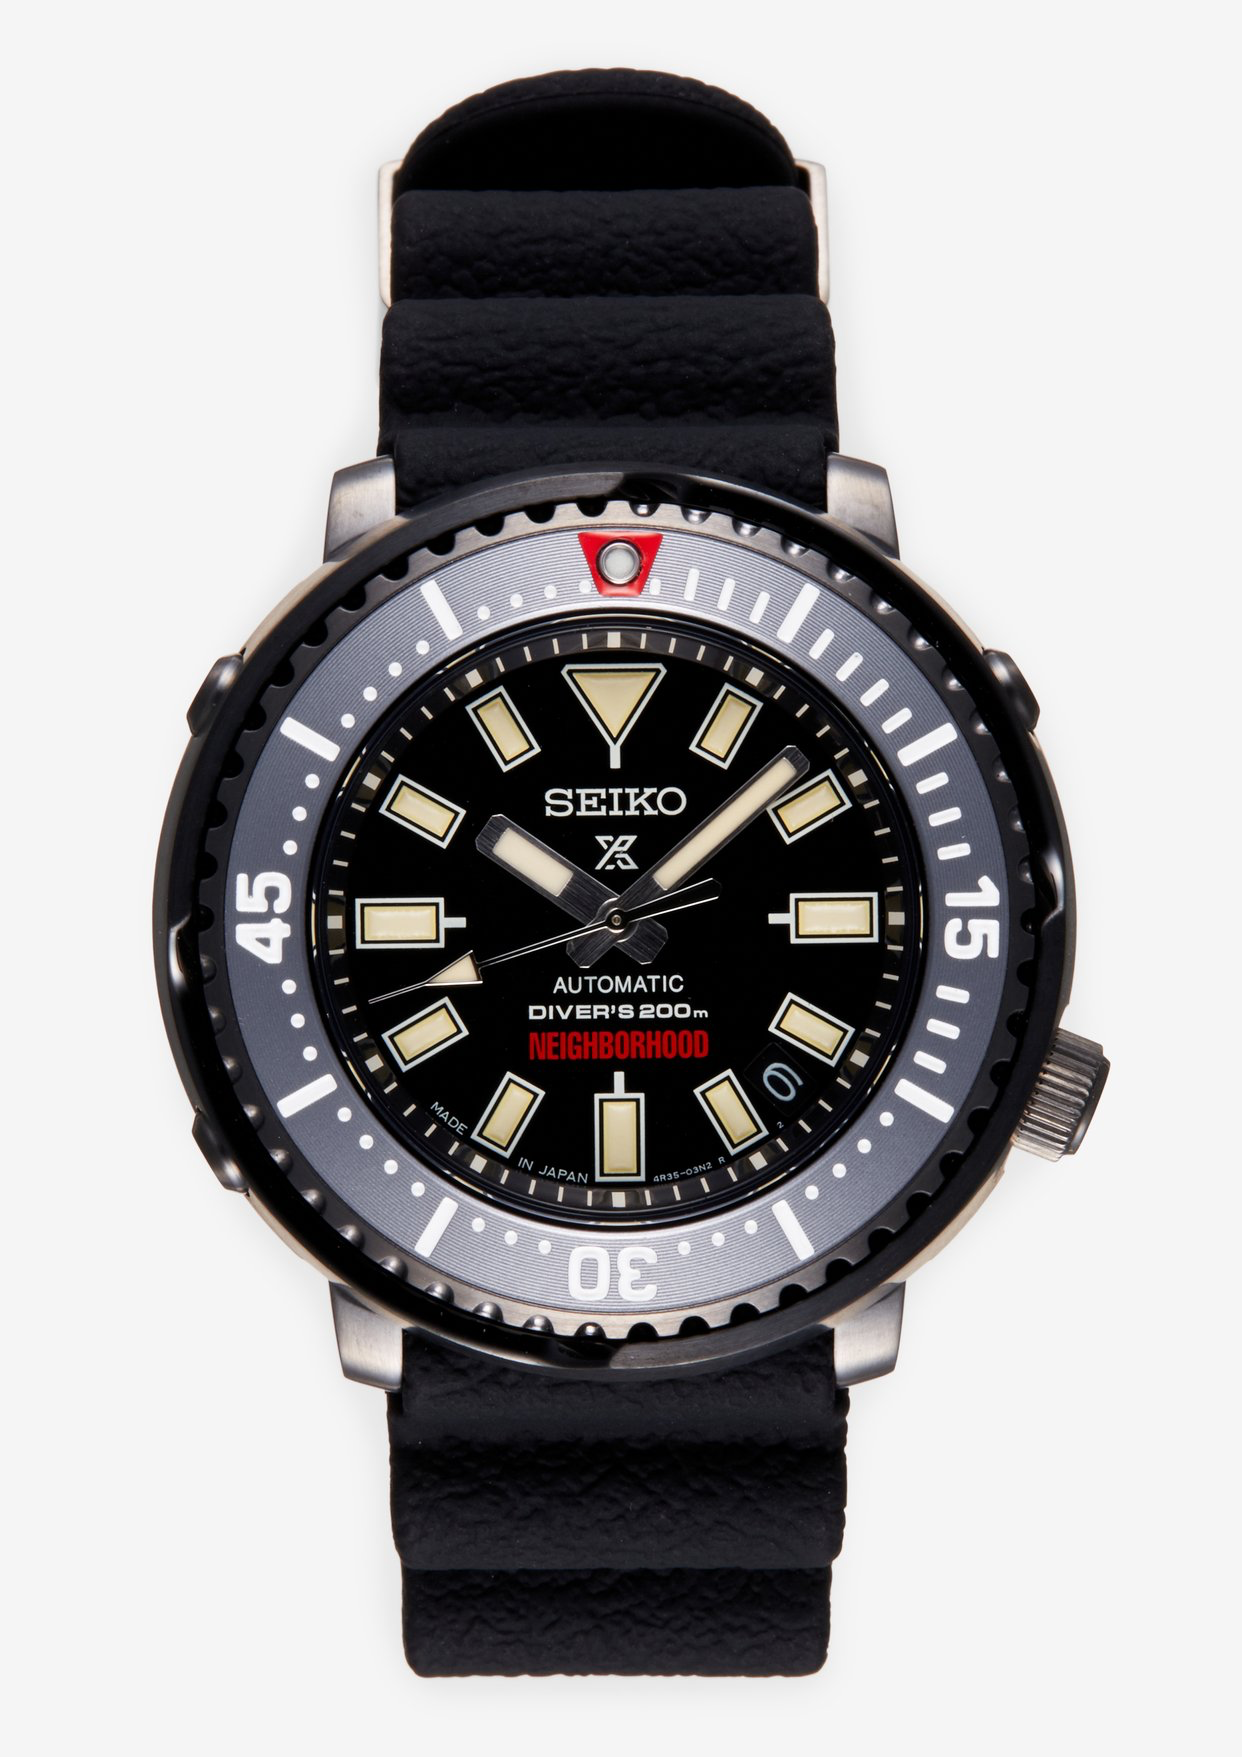 The Seiko x Neighborhood dive watch is awesome. Here are 5 watches that